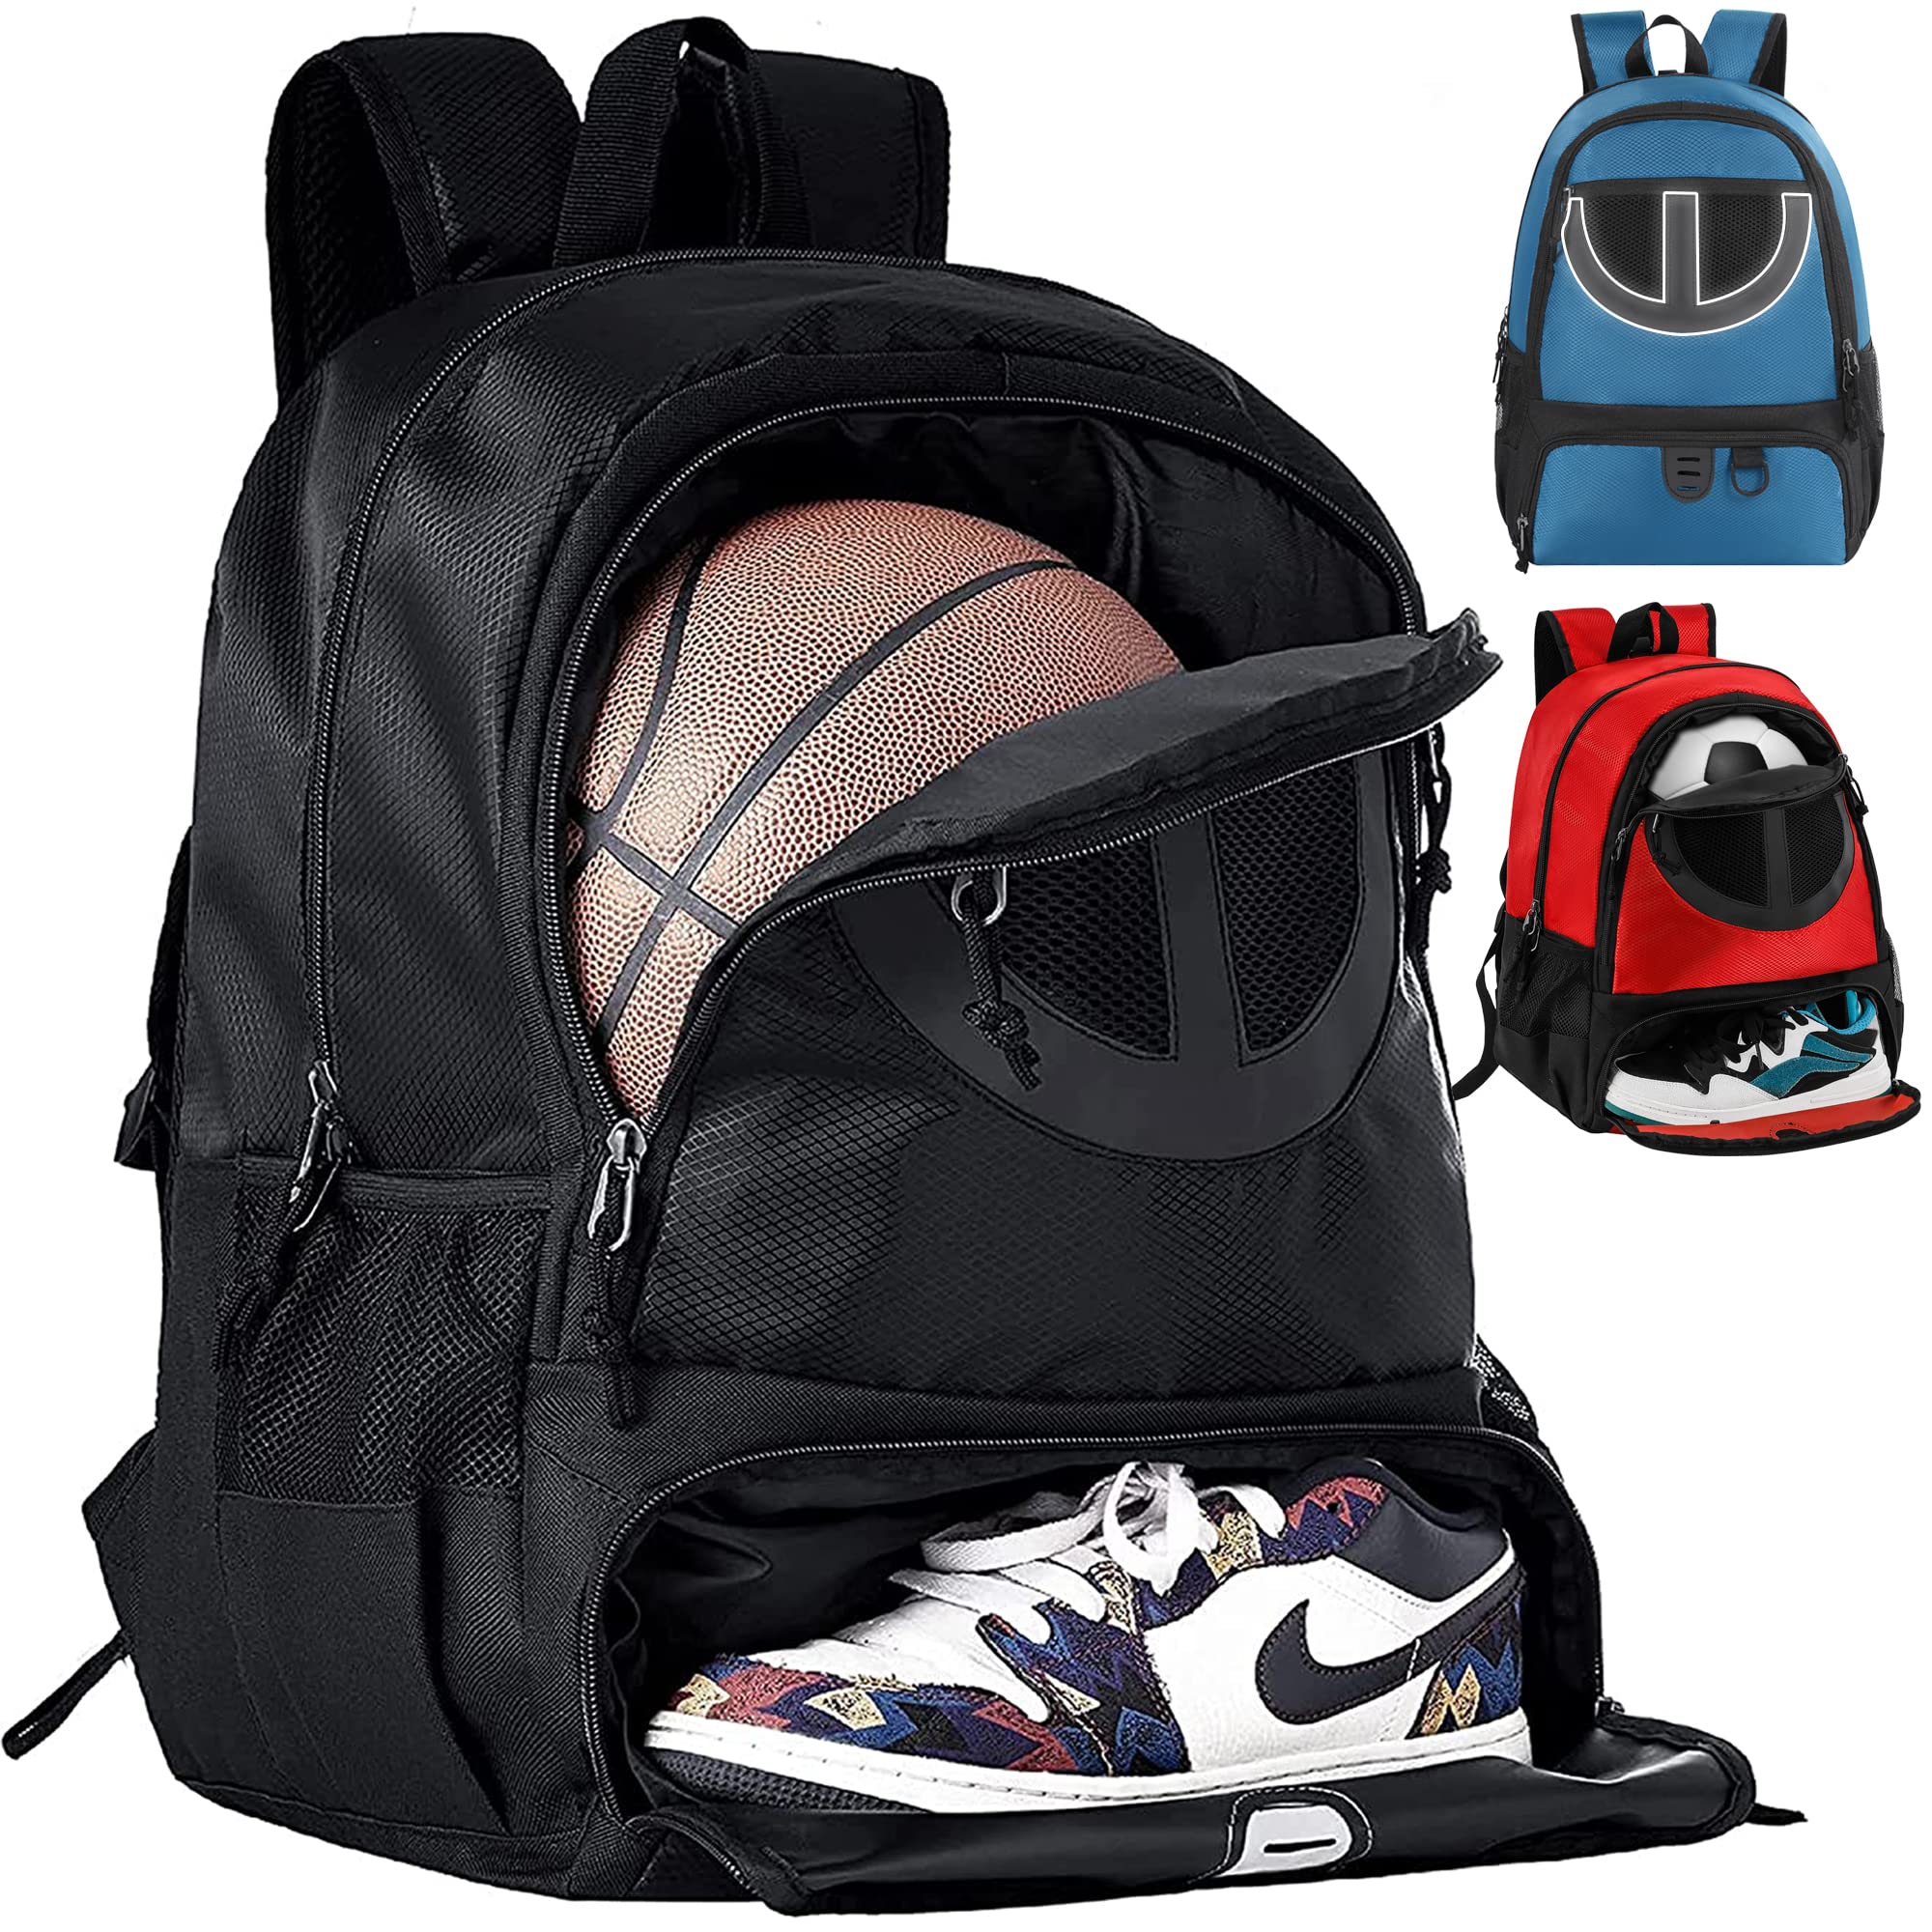 TRAILKICKER Mesh Black Basketball Soccer Bag Backpack Sports Volleyball Football Bag with Ball and Shoe Compartment for Boys Girls Man Women Ball Equipment Bag All Sports Venue